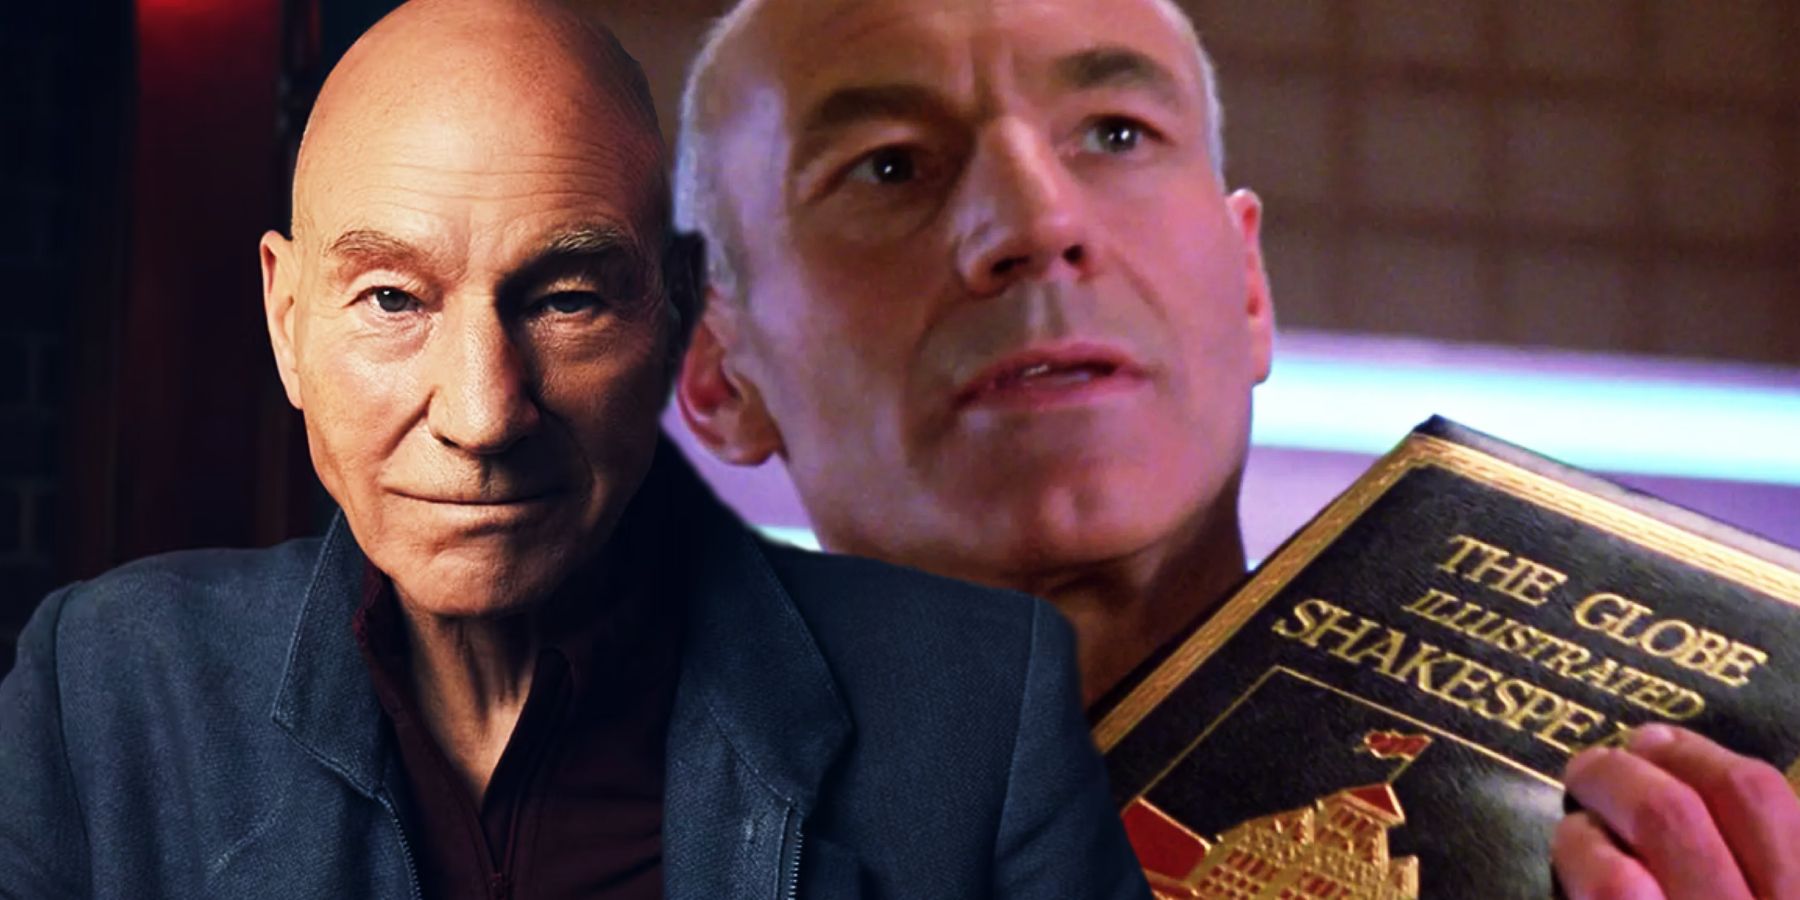 Admiral Picard (Patrick Stewart) and Captain Picard with the collected works of Shakespeare